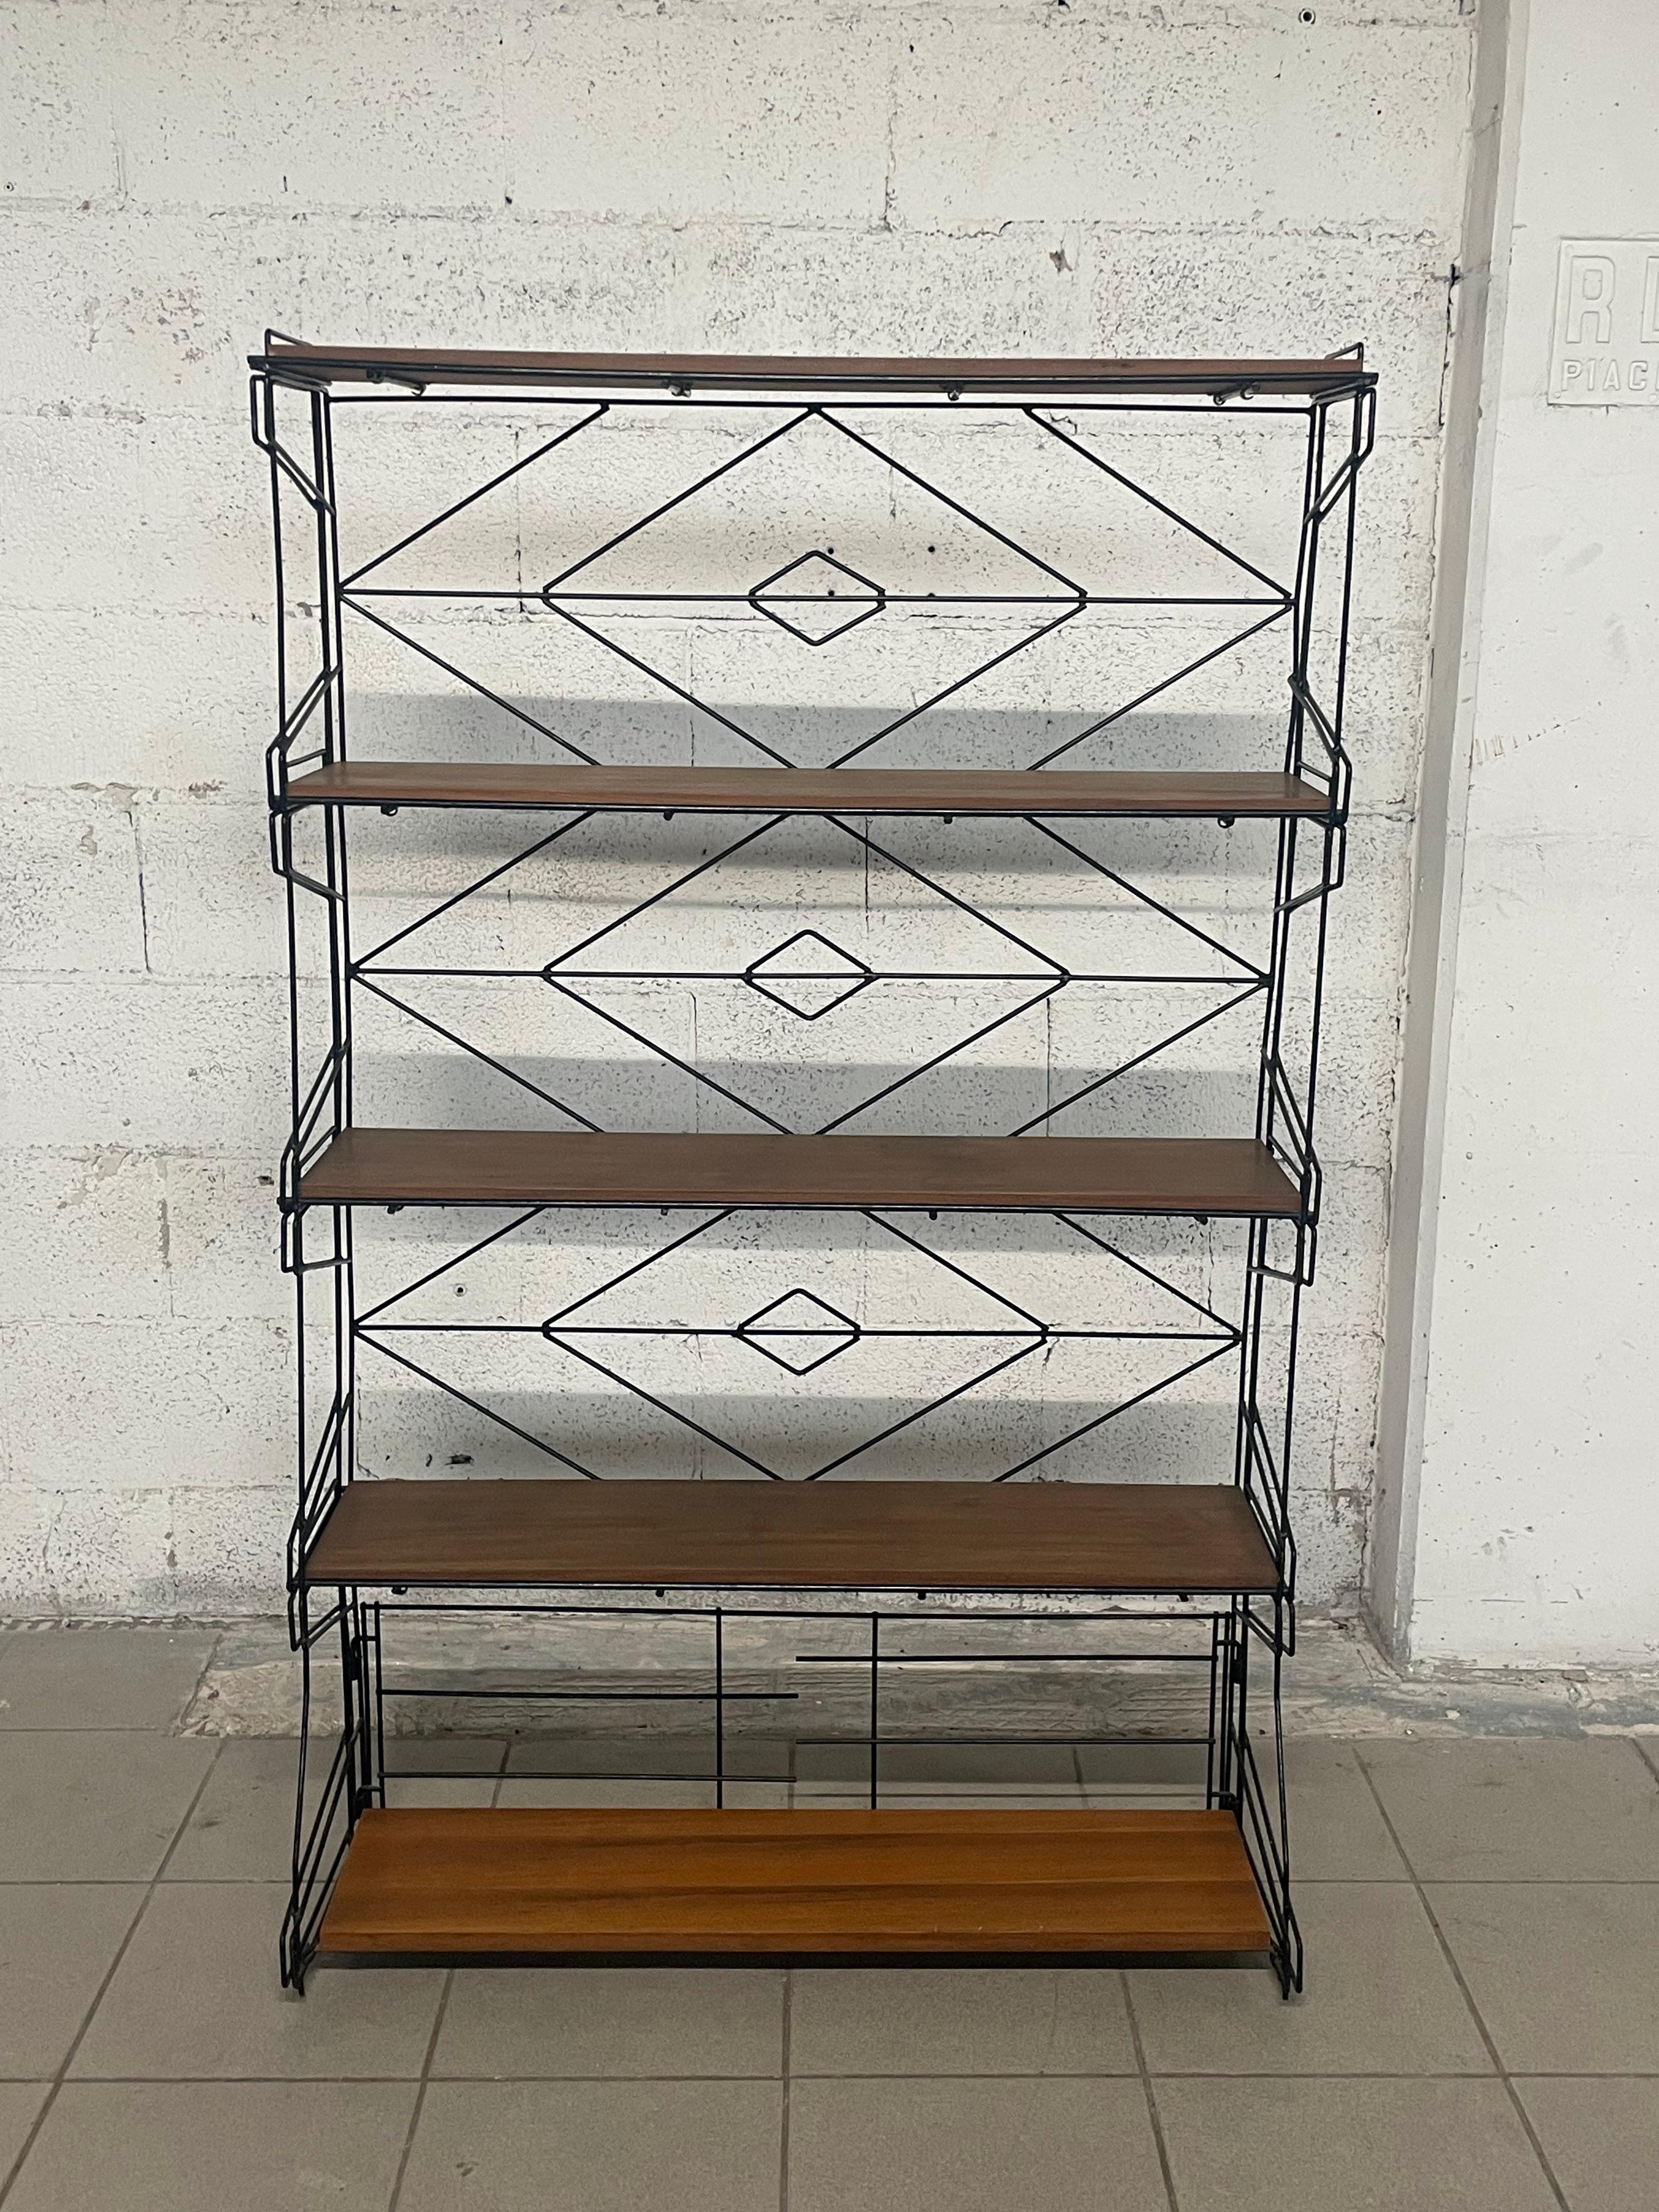 Italian-made 1960s bookcase featuring a wire mesh frame and 5 teak wood shelves.

Interesting is the block structure so you can vary the composition of the structure and wire mesh.

Also nice used as a partition between two rooms.

In very good